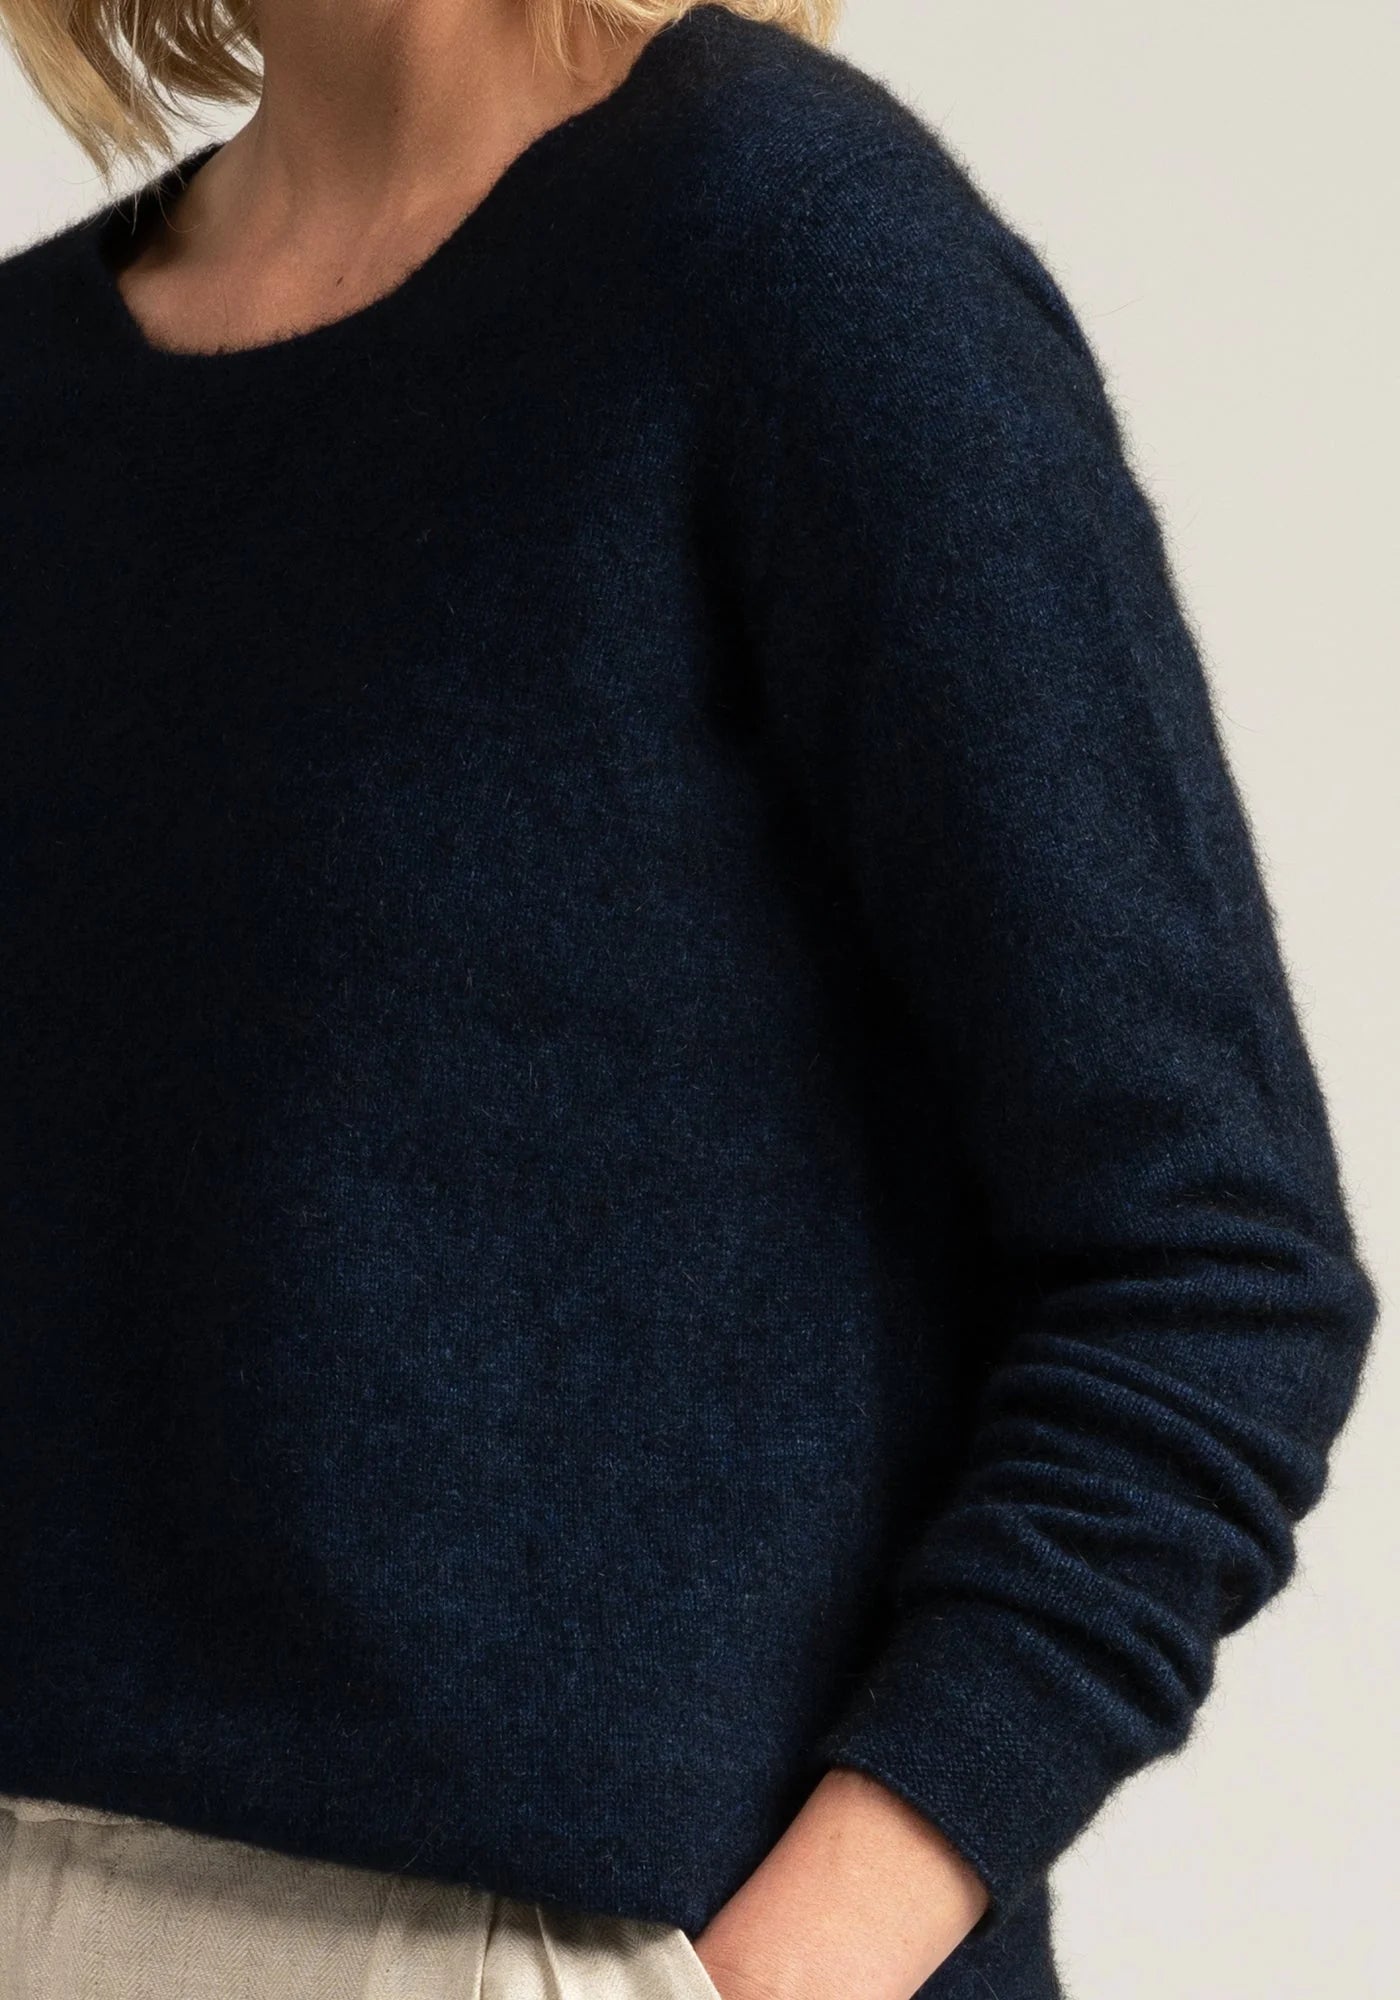 Stay cozy and stylish in our pure merino wool navy blue sweater. Luxurious warmth, timeless design—perfect for any occasion. Shop now for premium quality!"